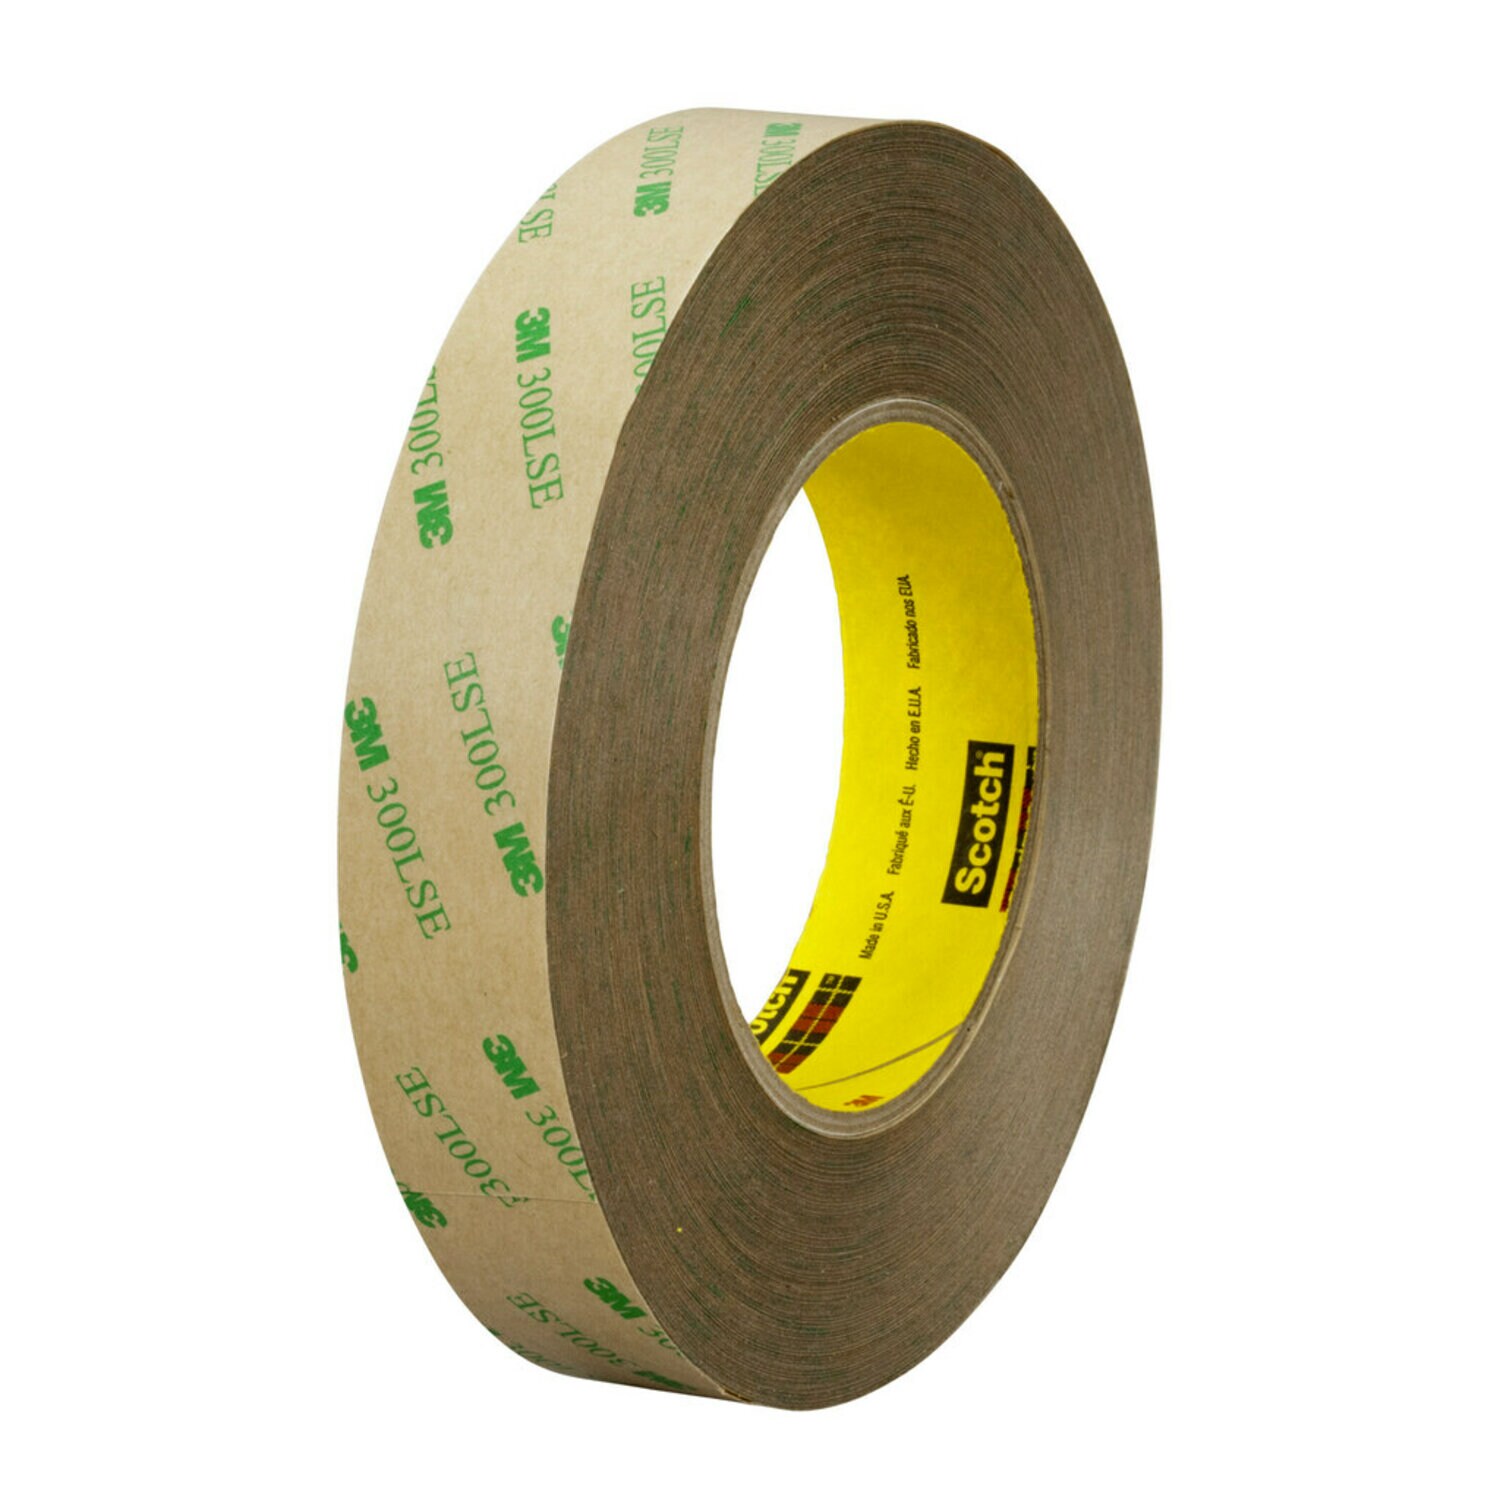 7000124931 - 3M Double Coated Tape 93010LE, Clear, 54 in x 180 yd, 3.9 mil, 1 roll
per case